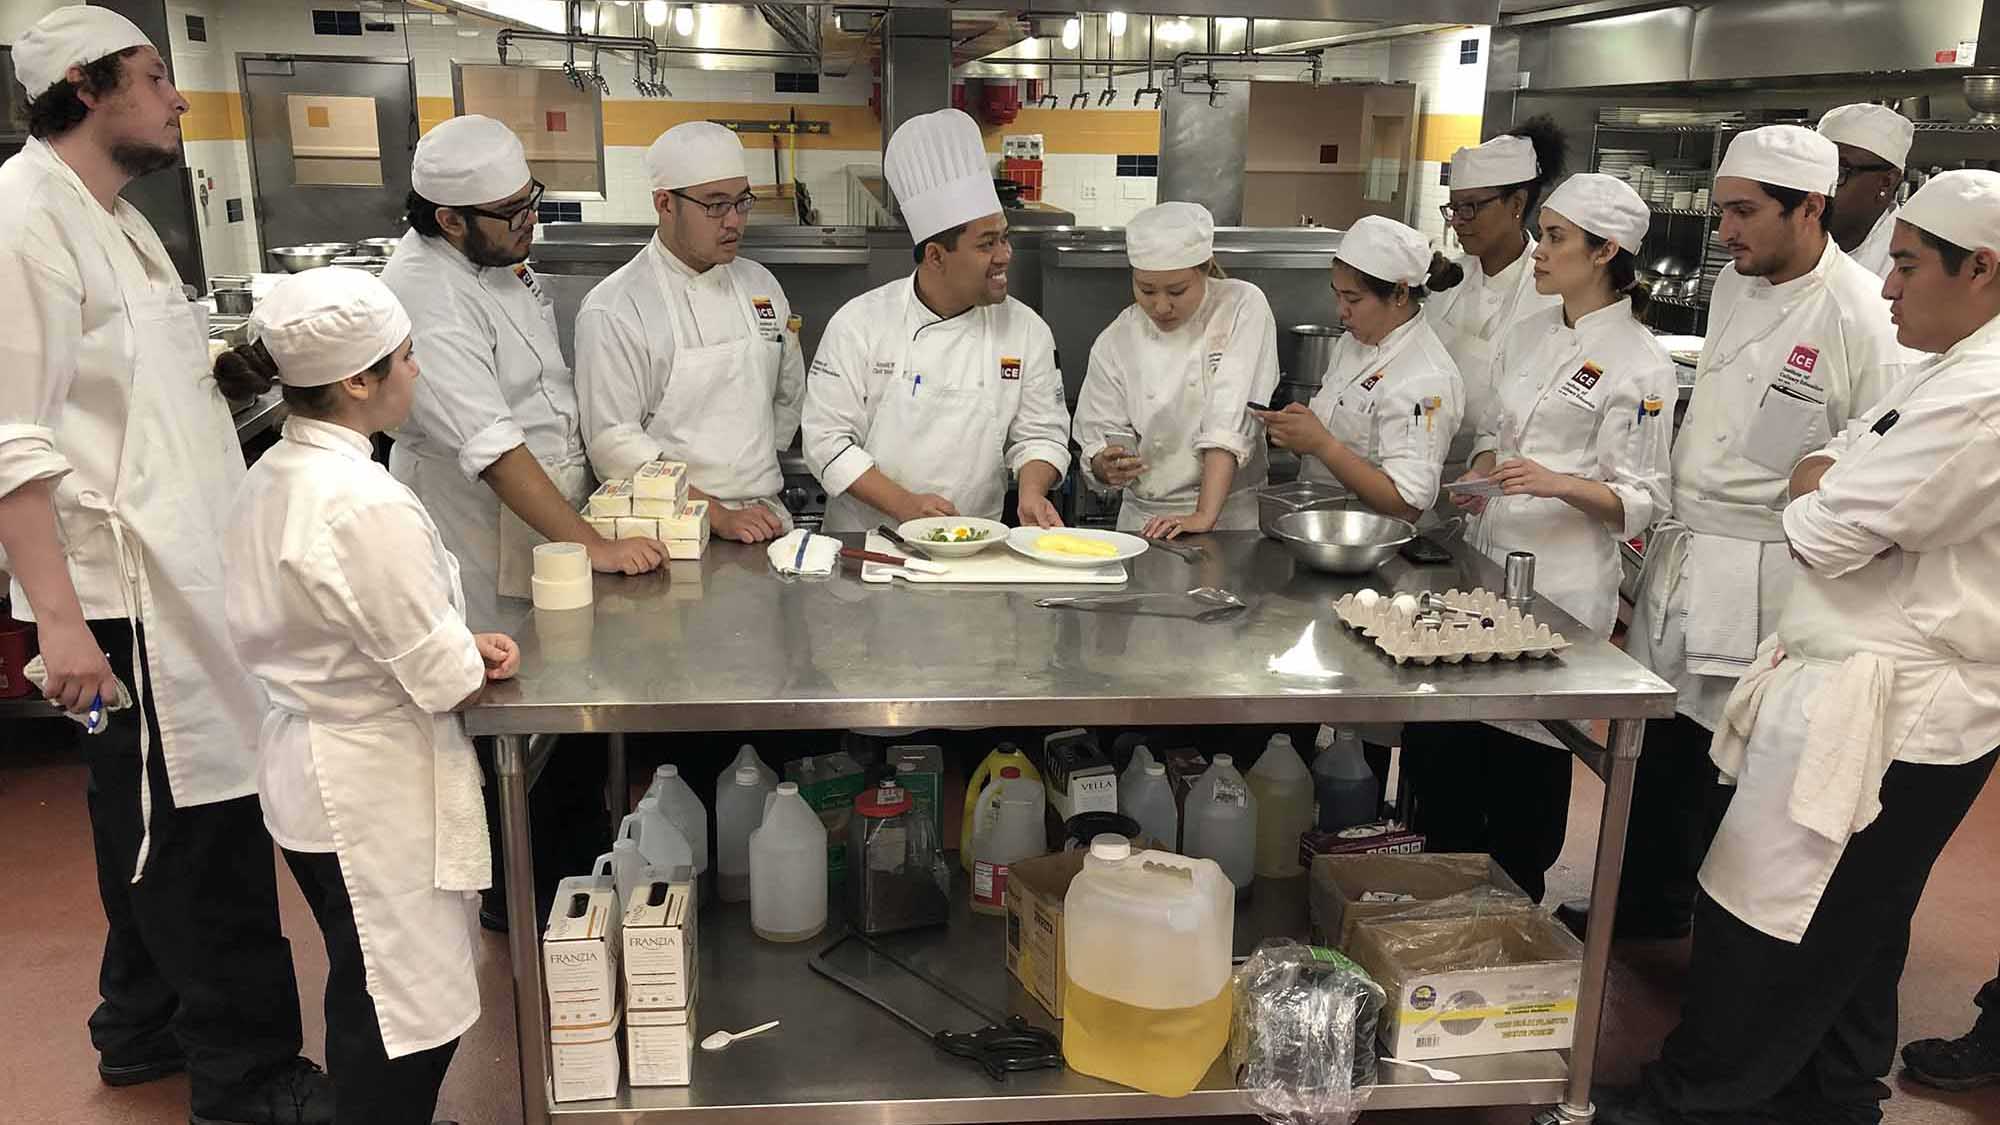 Chef-Instructor Arnold Myint teaches a Culinary Arts class at ICE's LA campus.